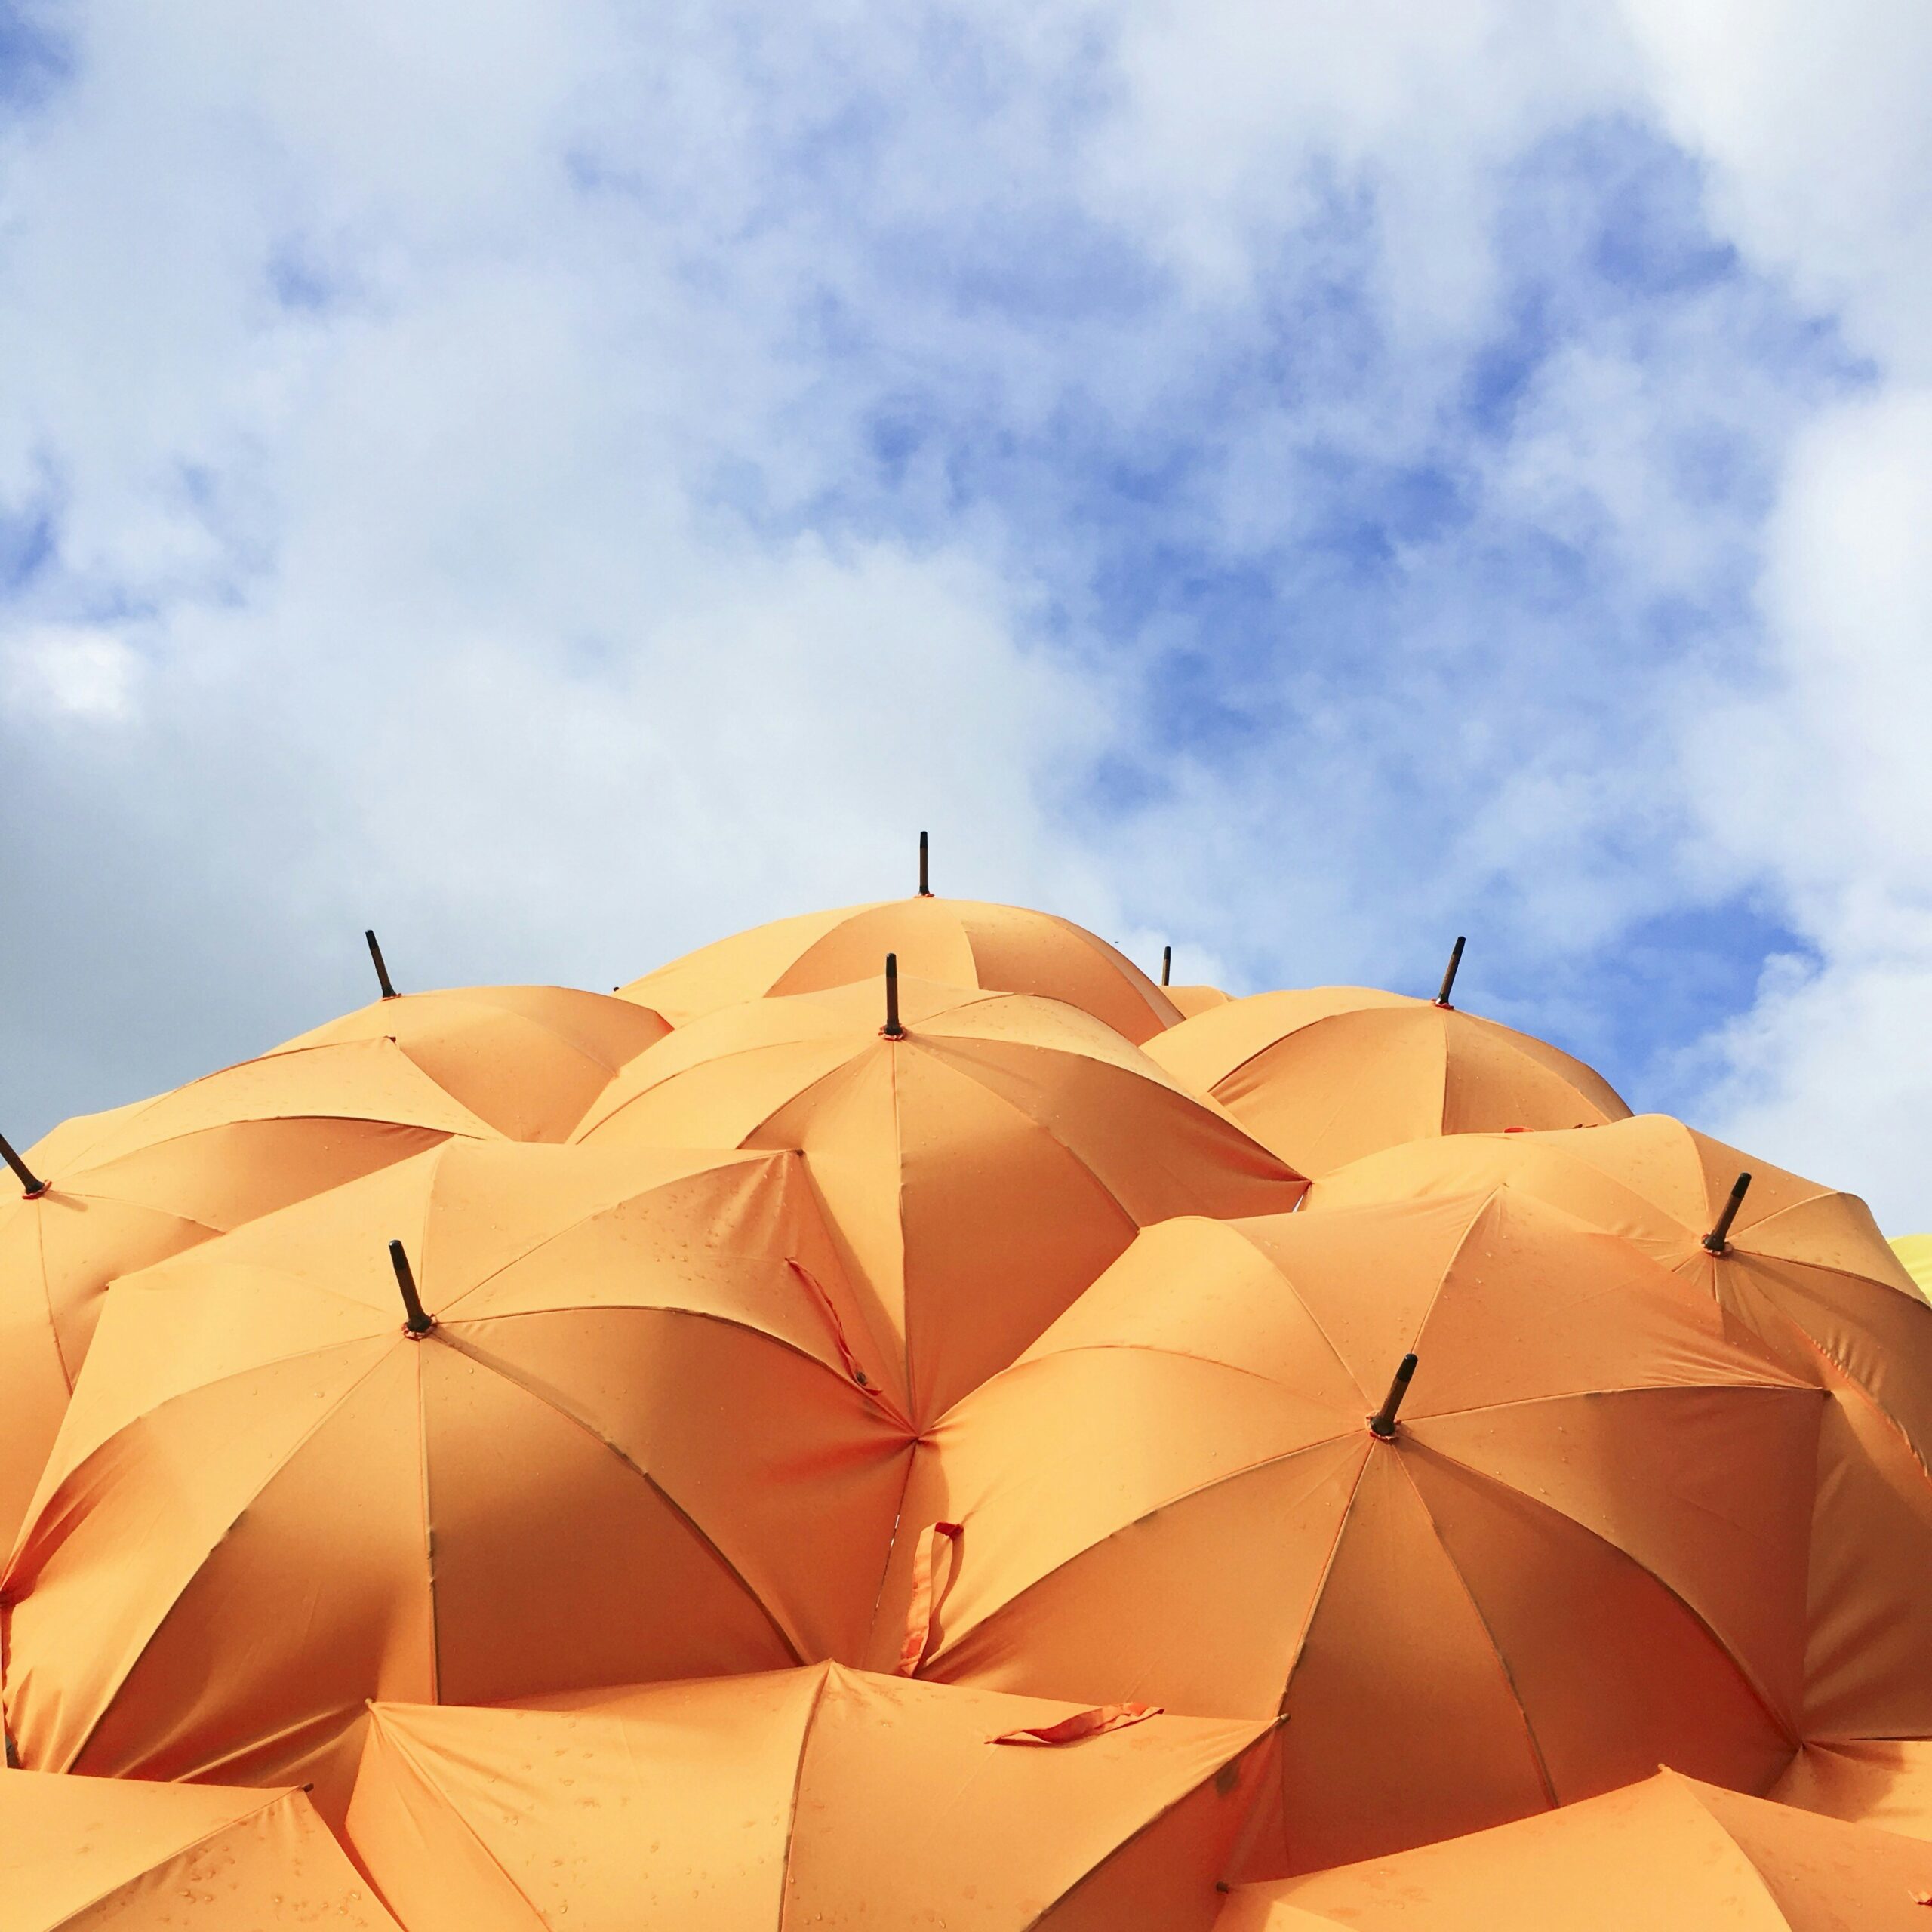 a photograph of a few orange umbrellas in front of the sky - risk mitigation concept